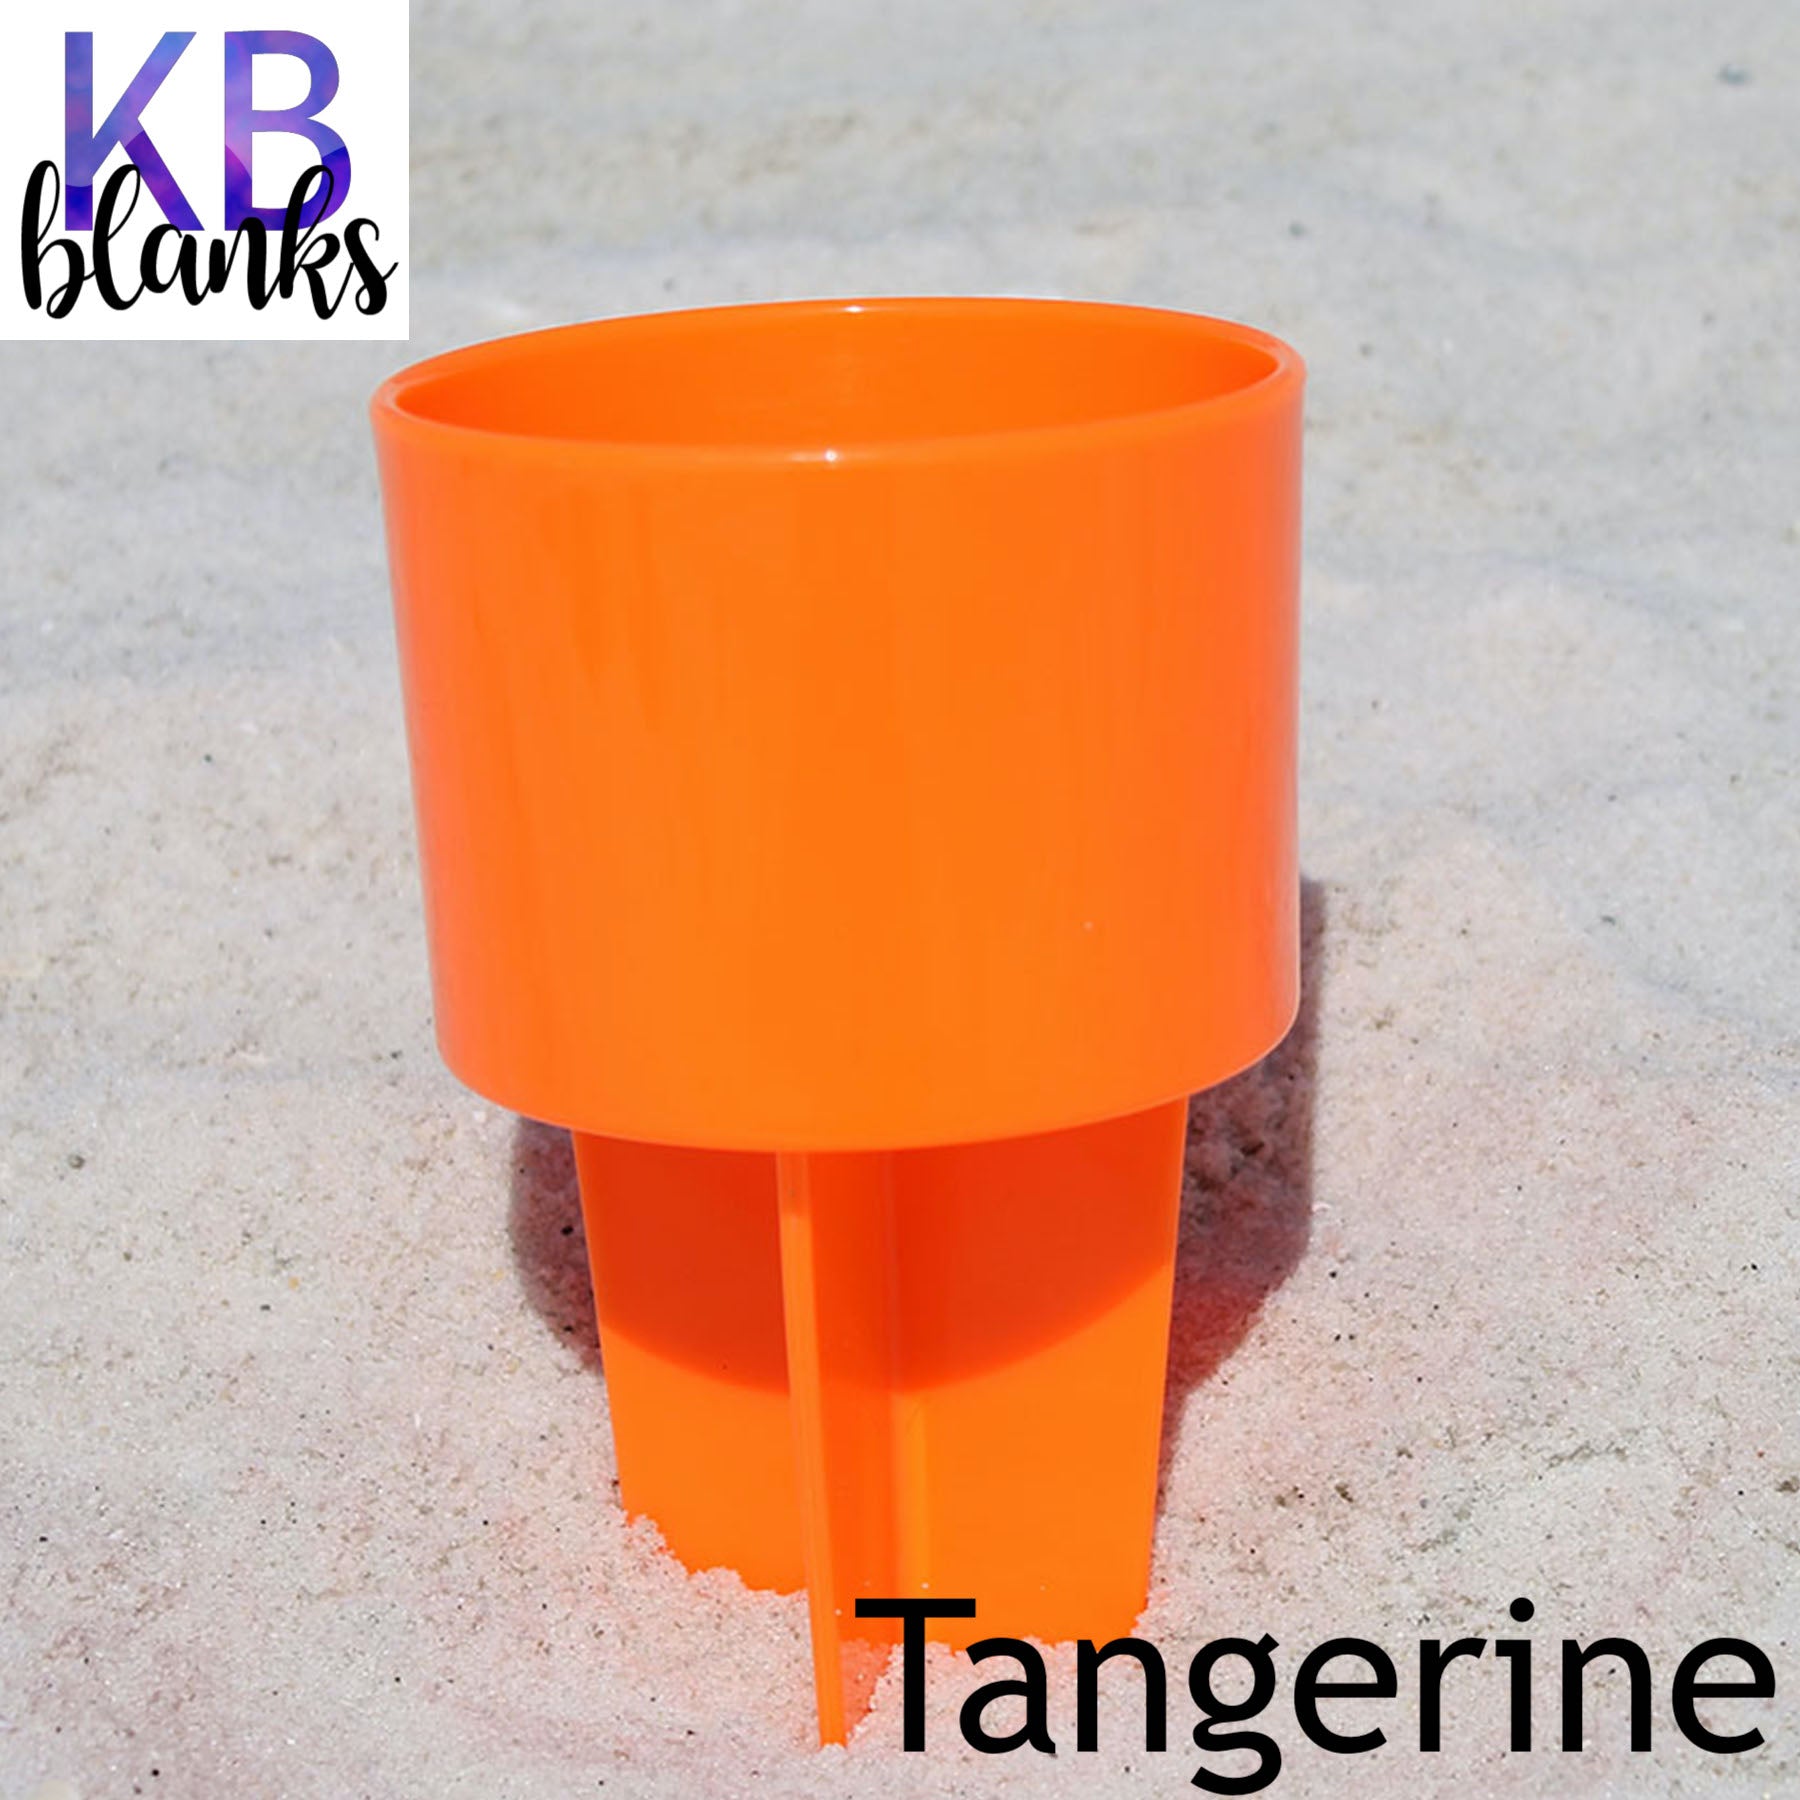 Spikers (Cup Holders For Beach) – KB blanks LLC